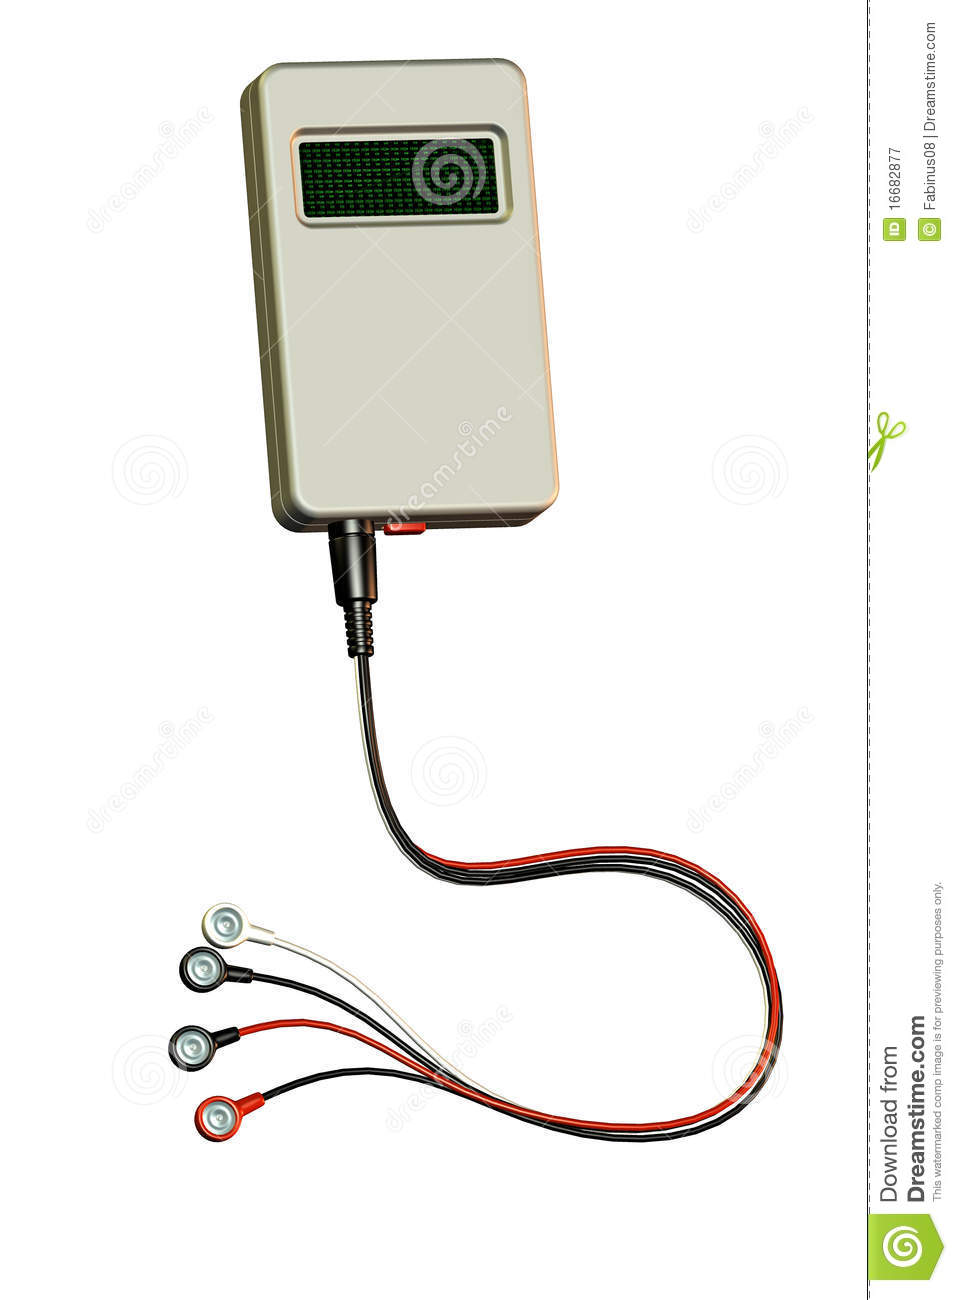 Medical Portable Holter Monitor Device Used For Monitoring Heart Or    